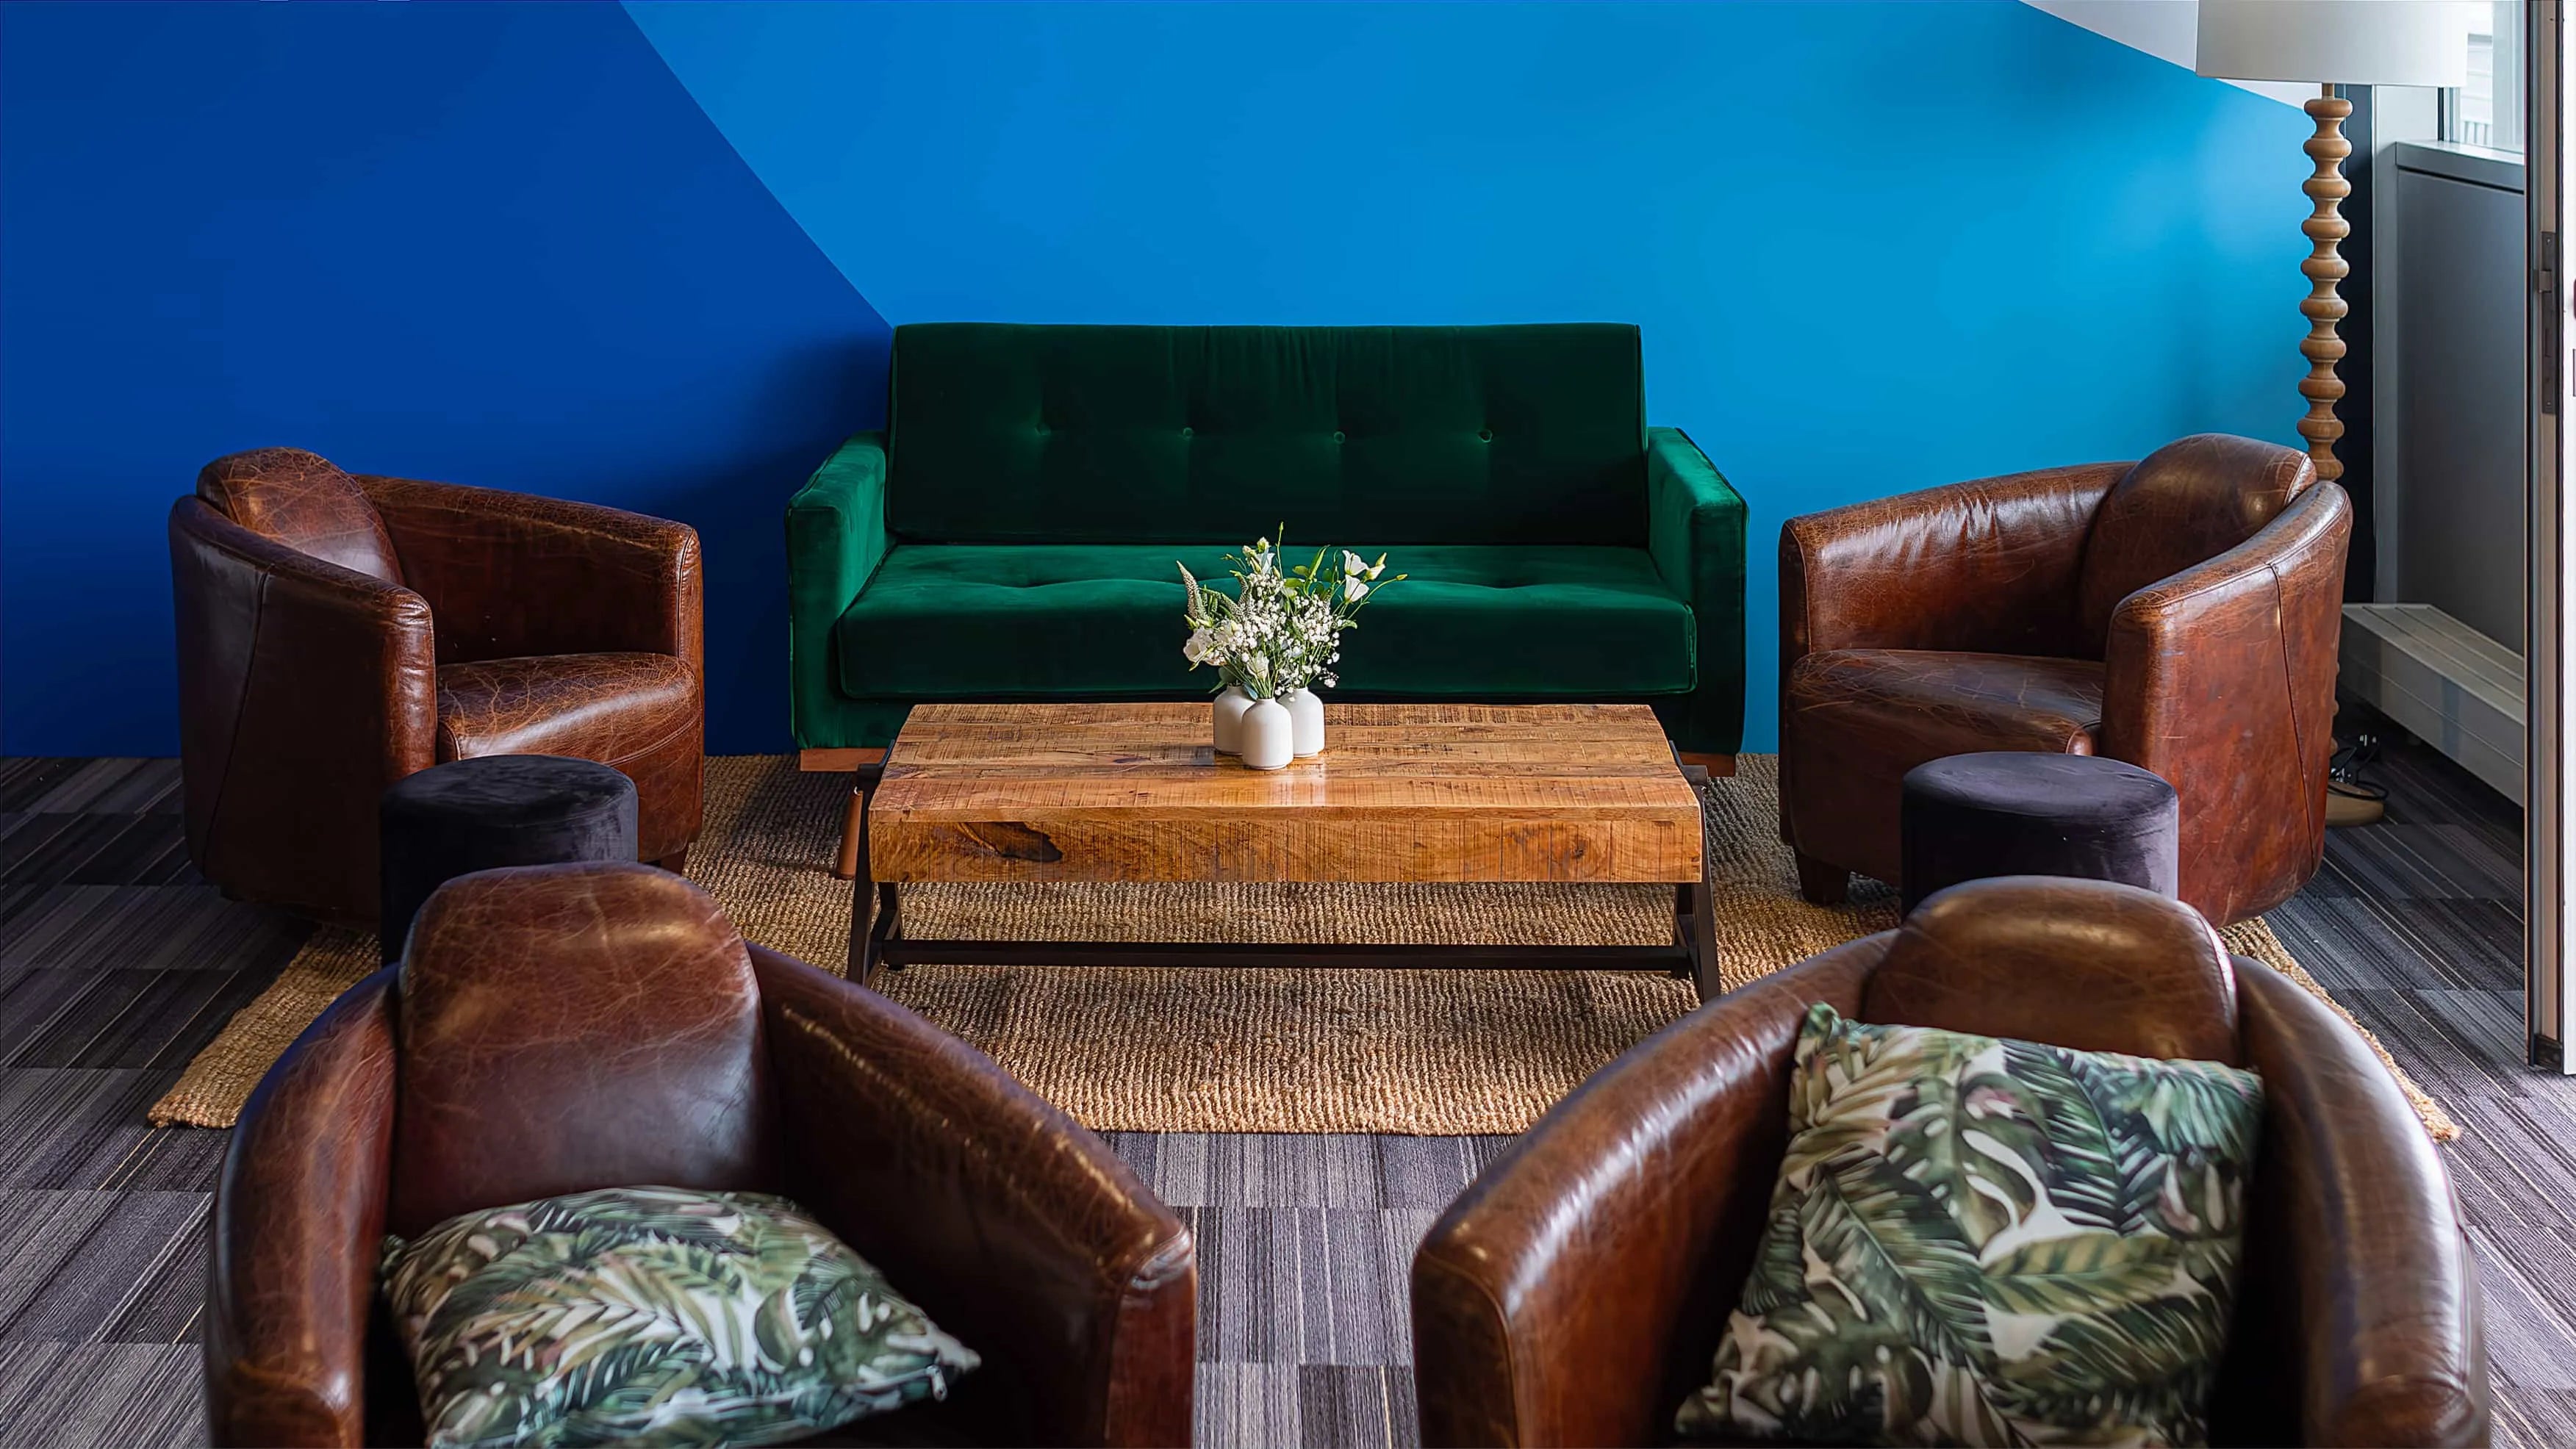 Chic and cosy lounge area featuring a bold emerald green sofa and vintage brown leather chairs, complemented by a simple yet stylish white floral arrangement on a rustic coffee table set against a vibrant blue wall - Amaranté London.